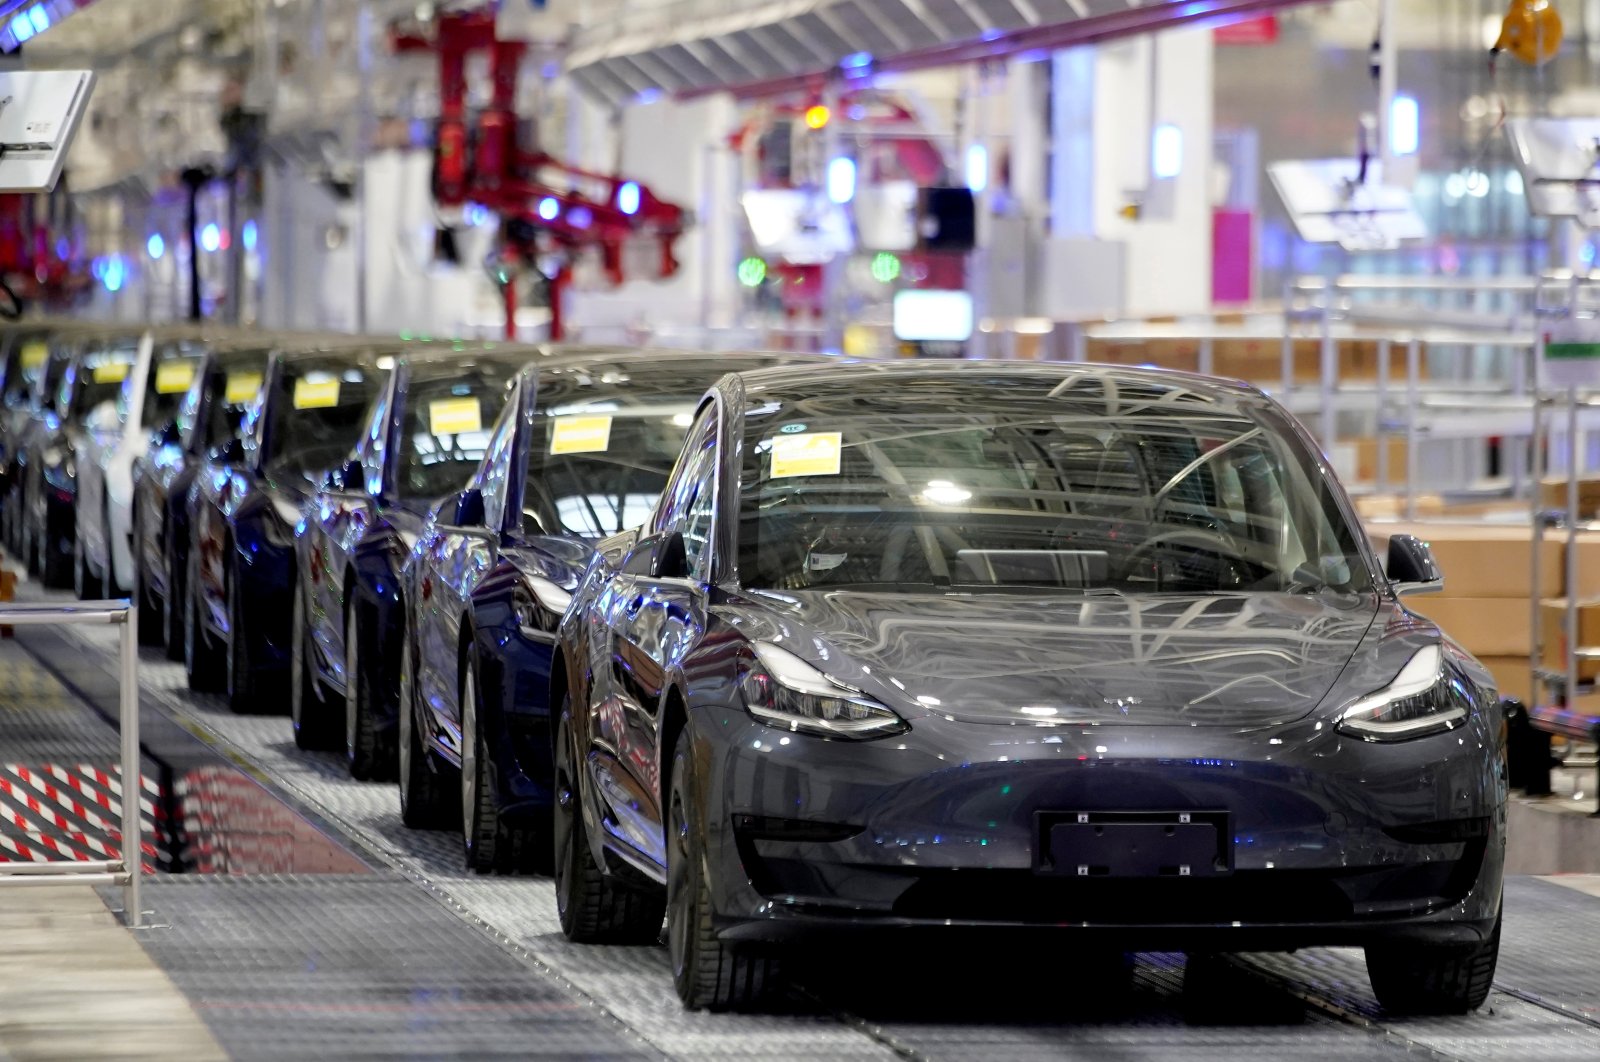 Tesla's China-made Model 3 vehicles are seen during a delivery event at its factory in Shanghai, China, Jan. 7, 2020. (Reuters Photo)